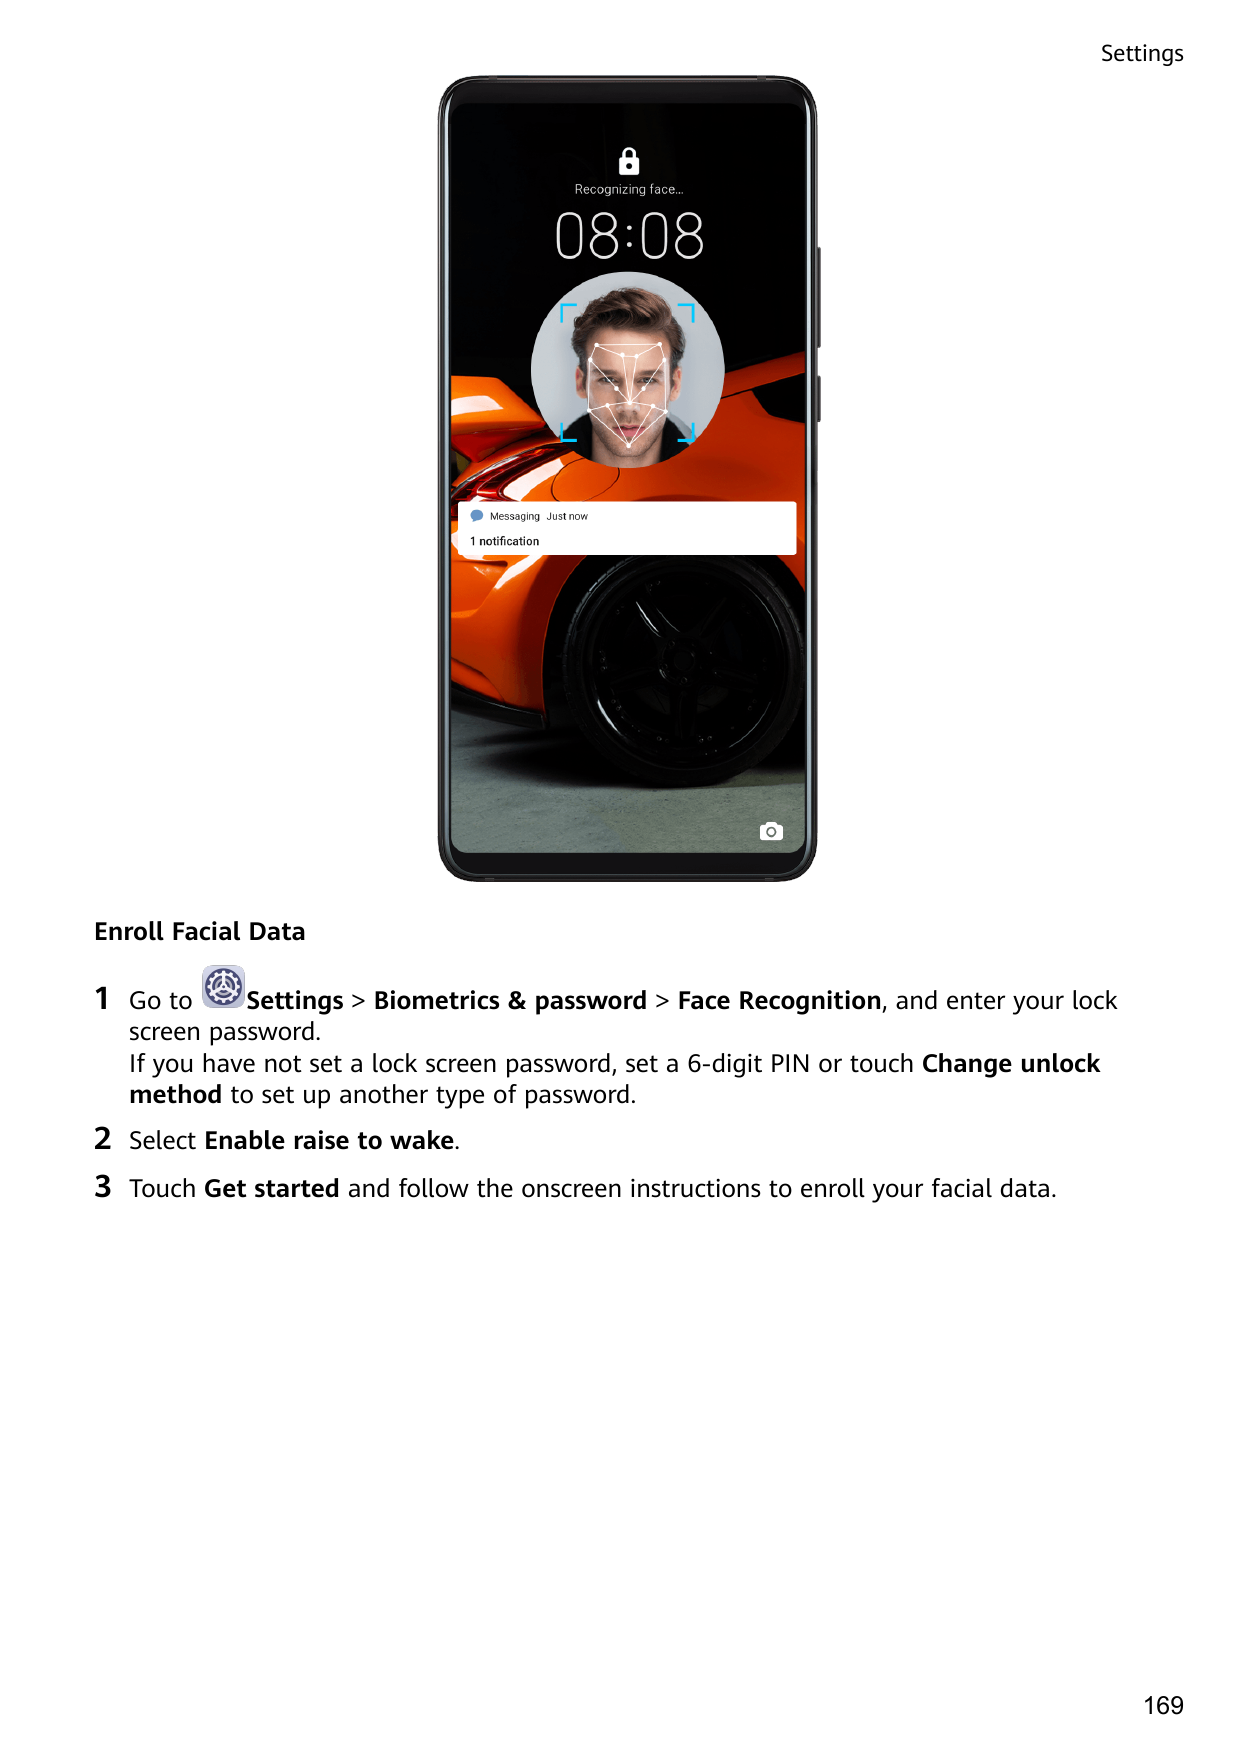 SettingsEnroll Facial Data1Settings > Biometrics & password > Face Recognition, and enter your lockGo toscreen password.If you h